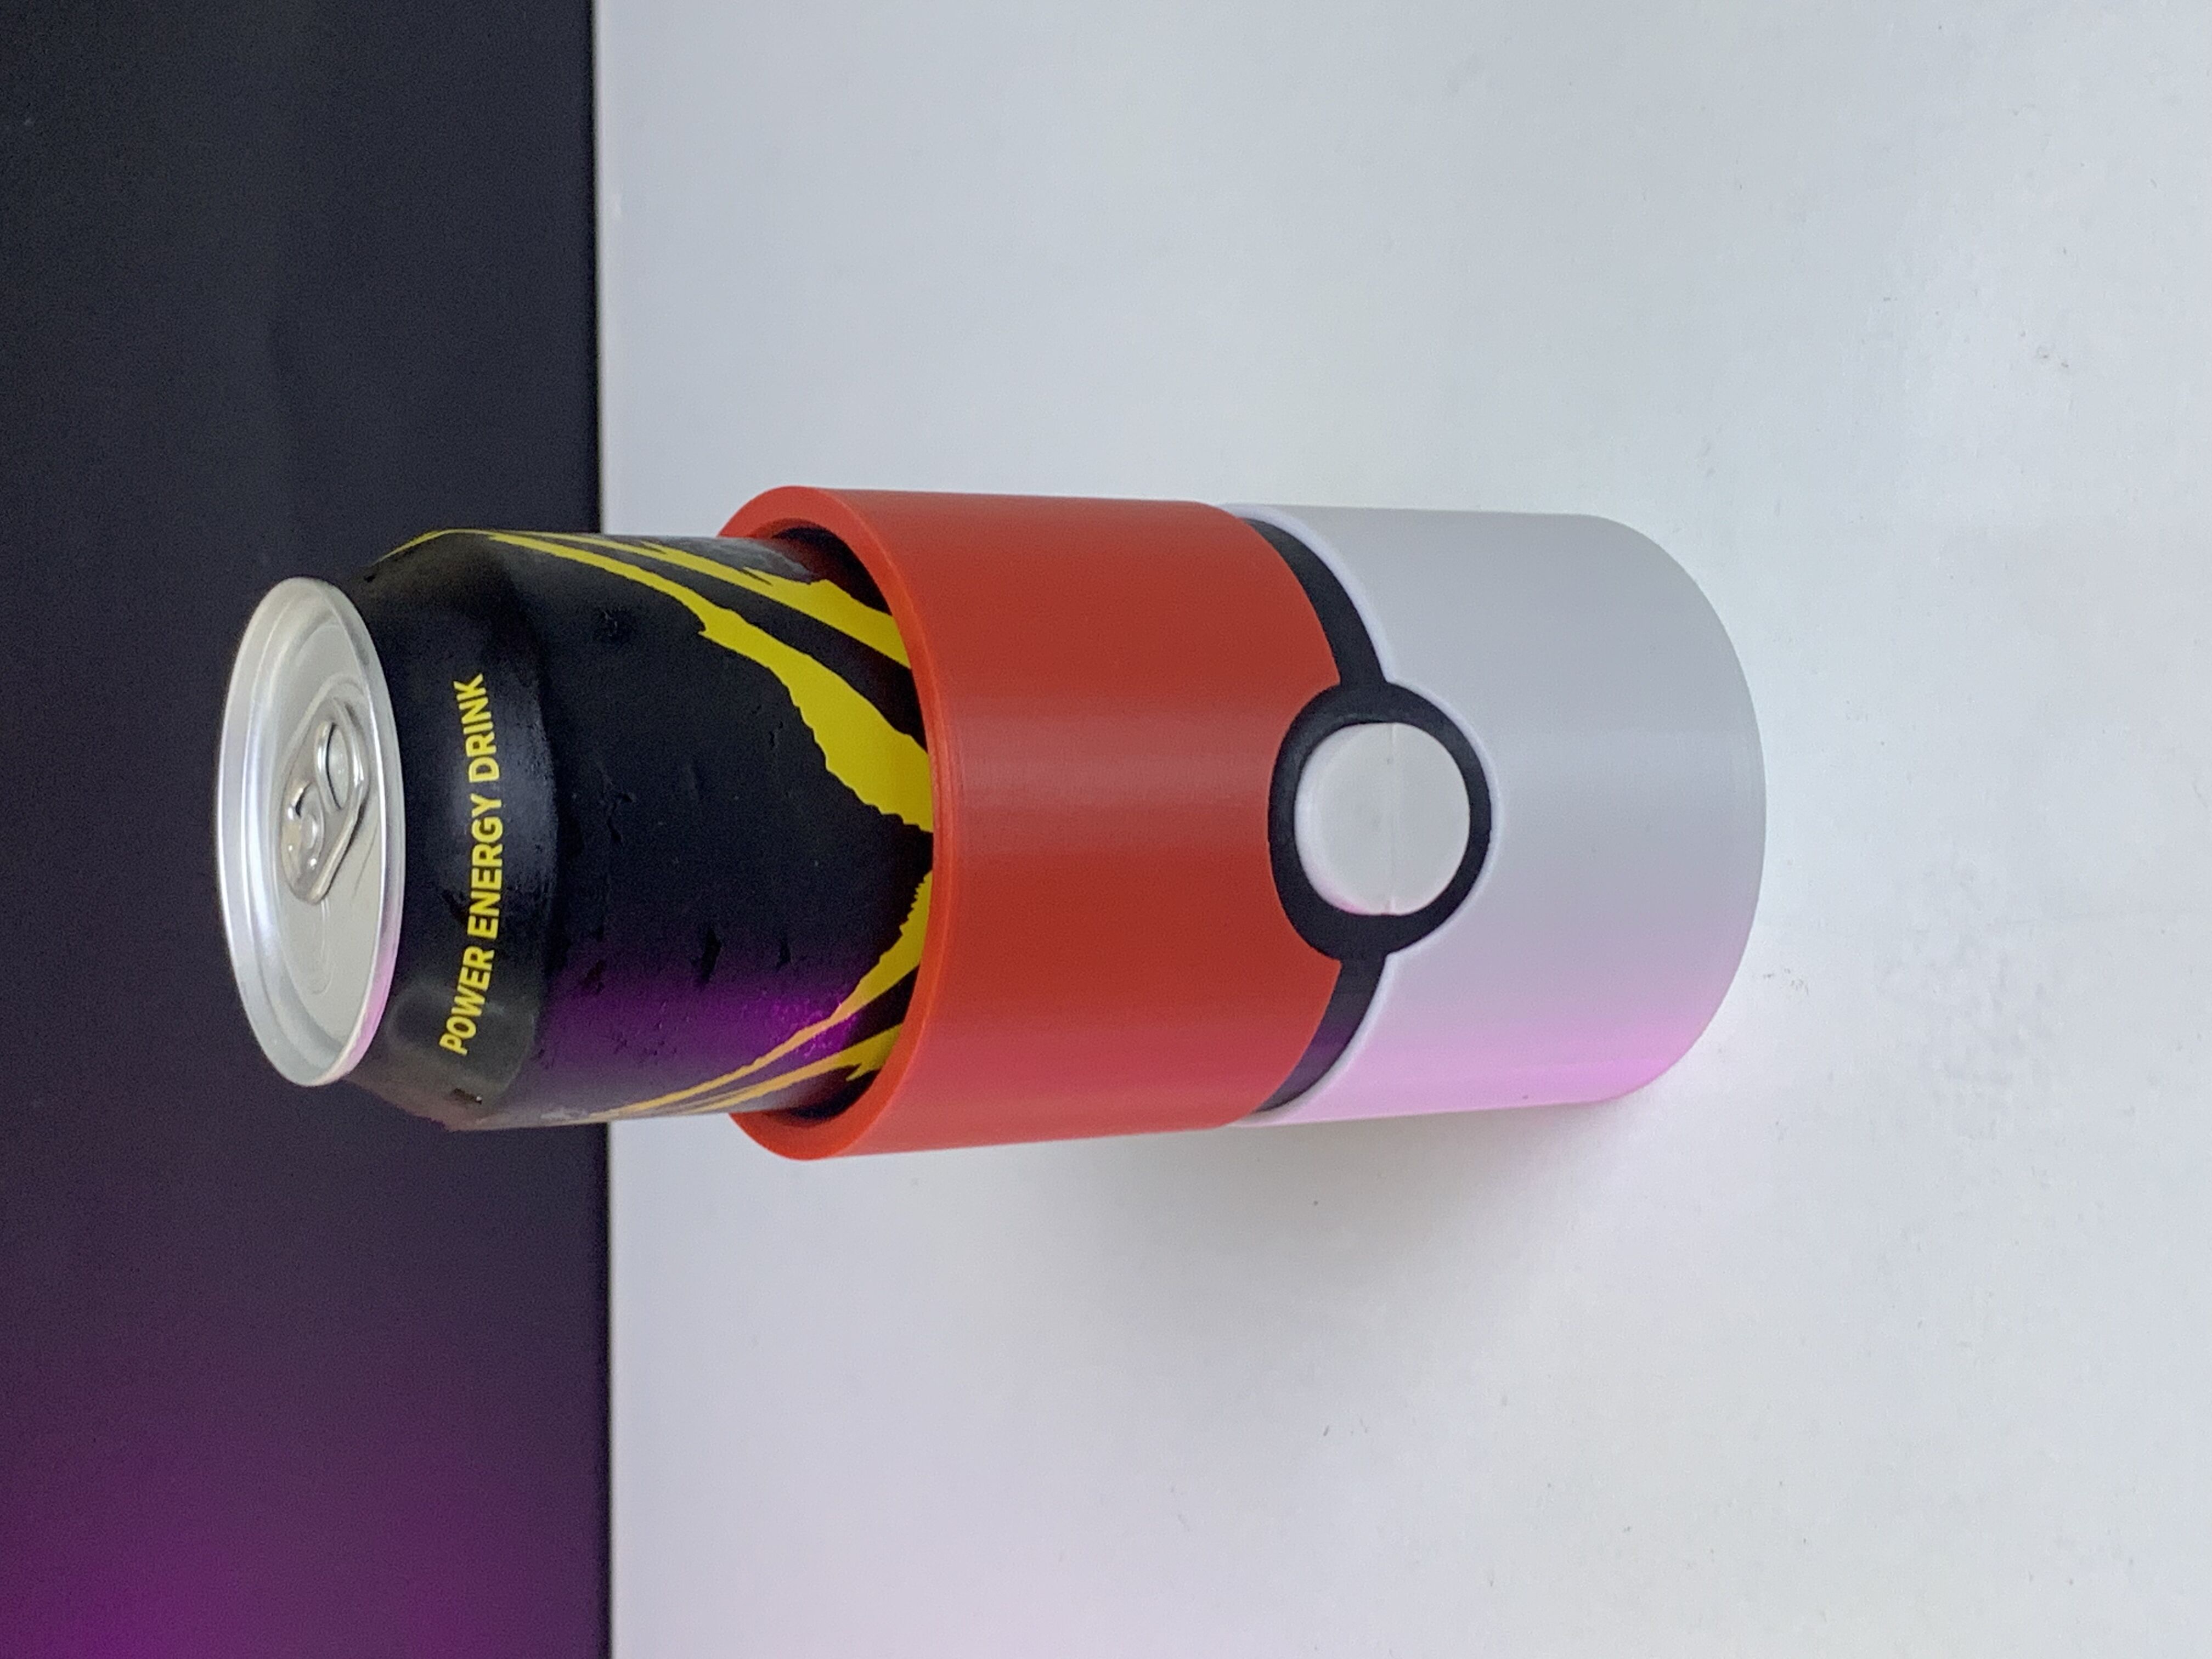 pokeball inspired can cup